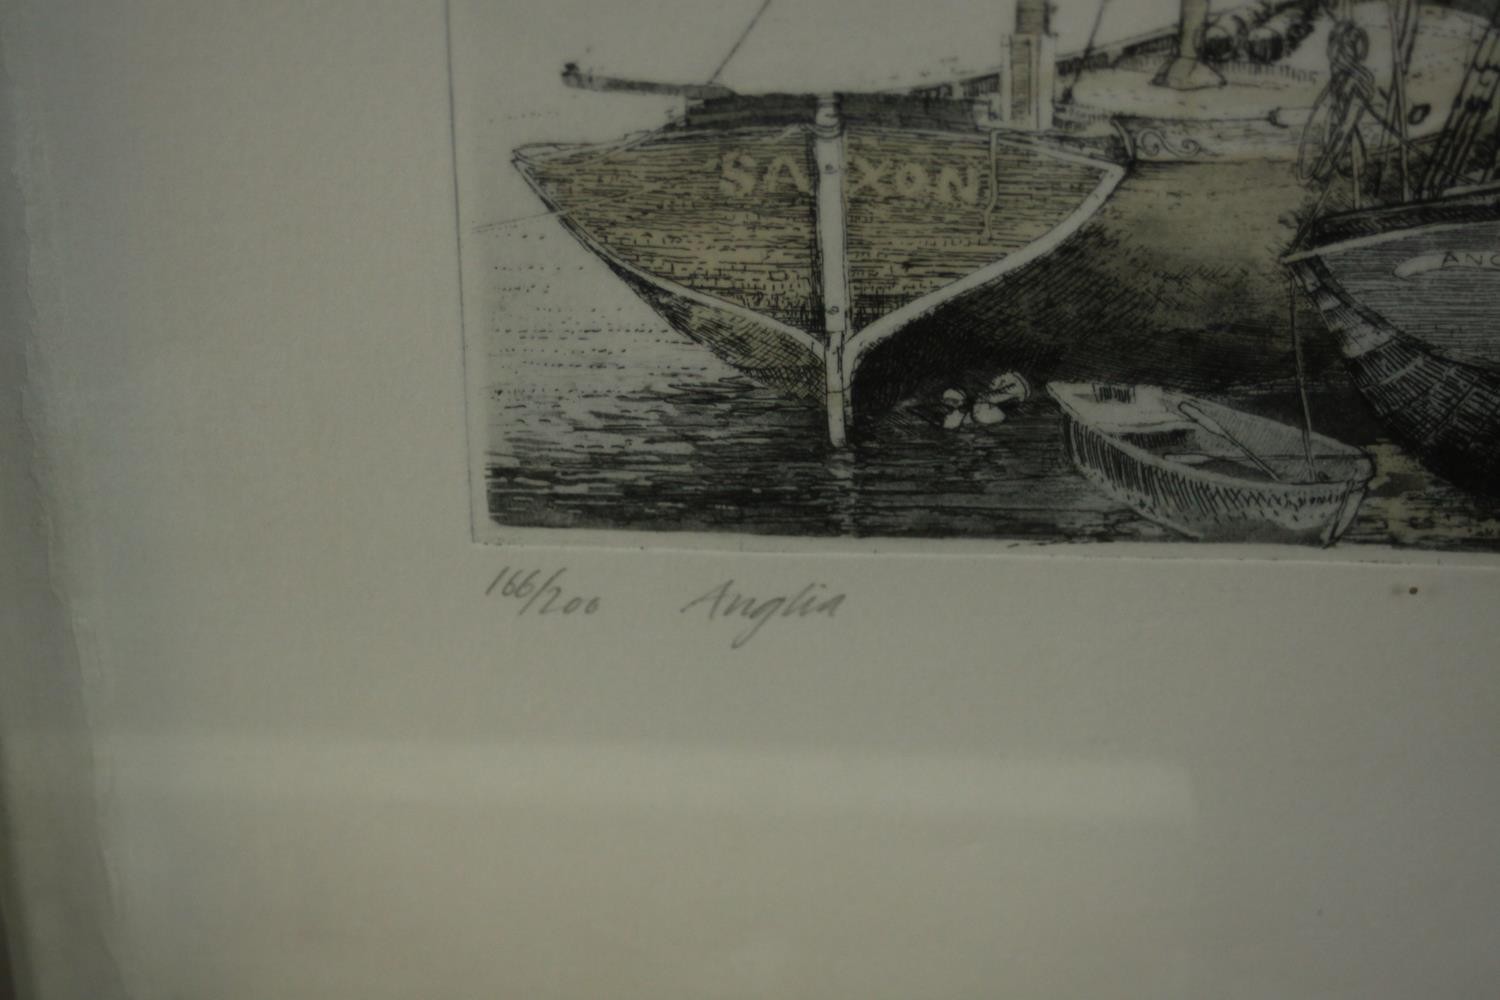 Michael Chaplin RE (British b1943) 'Iron Wharf' and 'Anglia', etching and aquatint, signed, titled - Image 8 of 9